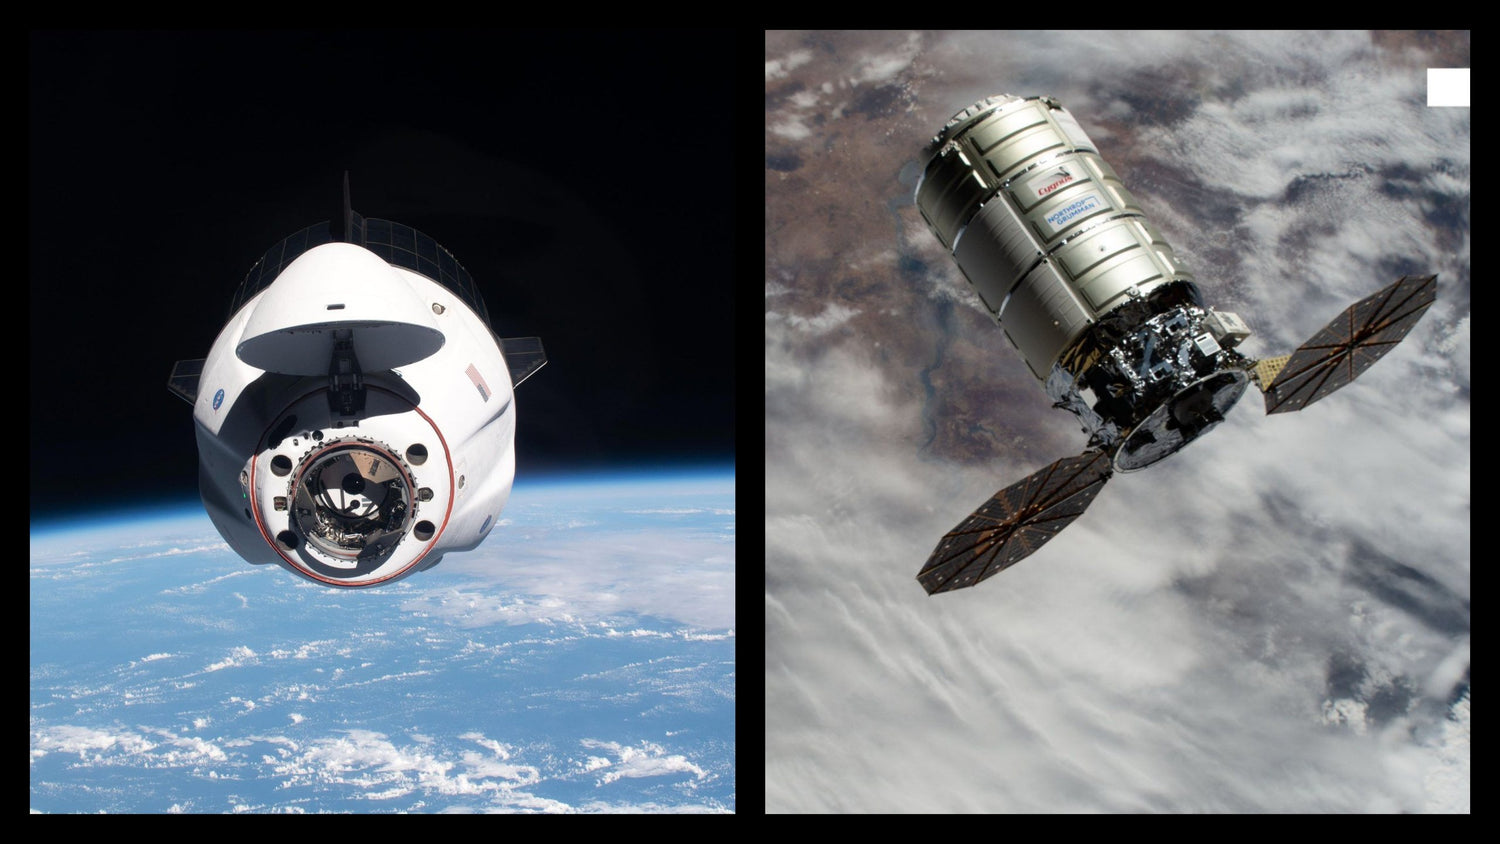 NASA Purchases Twelve Additional Cargo Flights To The Space Station from SpaceX & Northrop Grumman